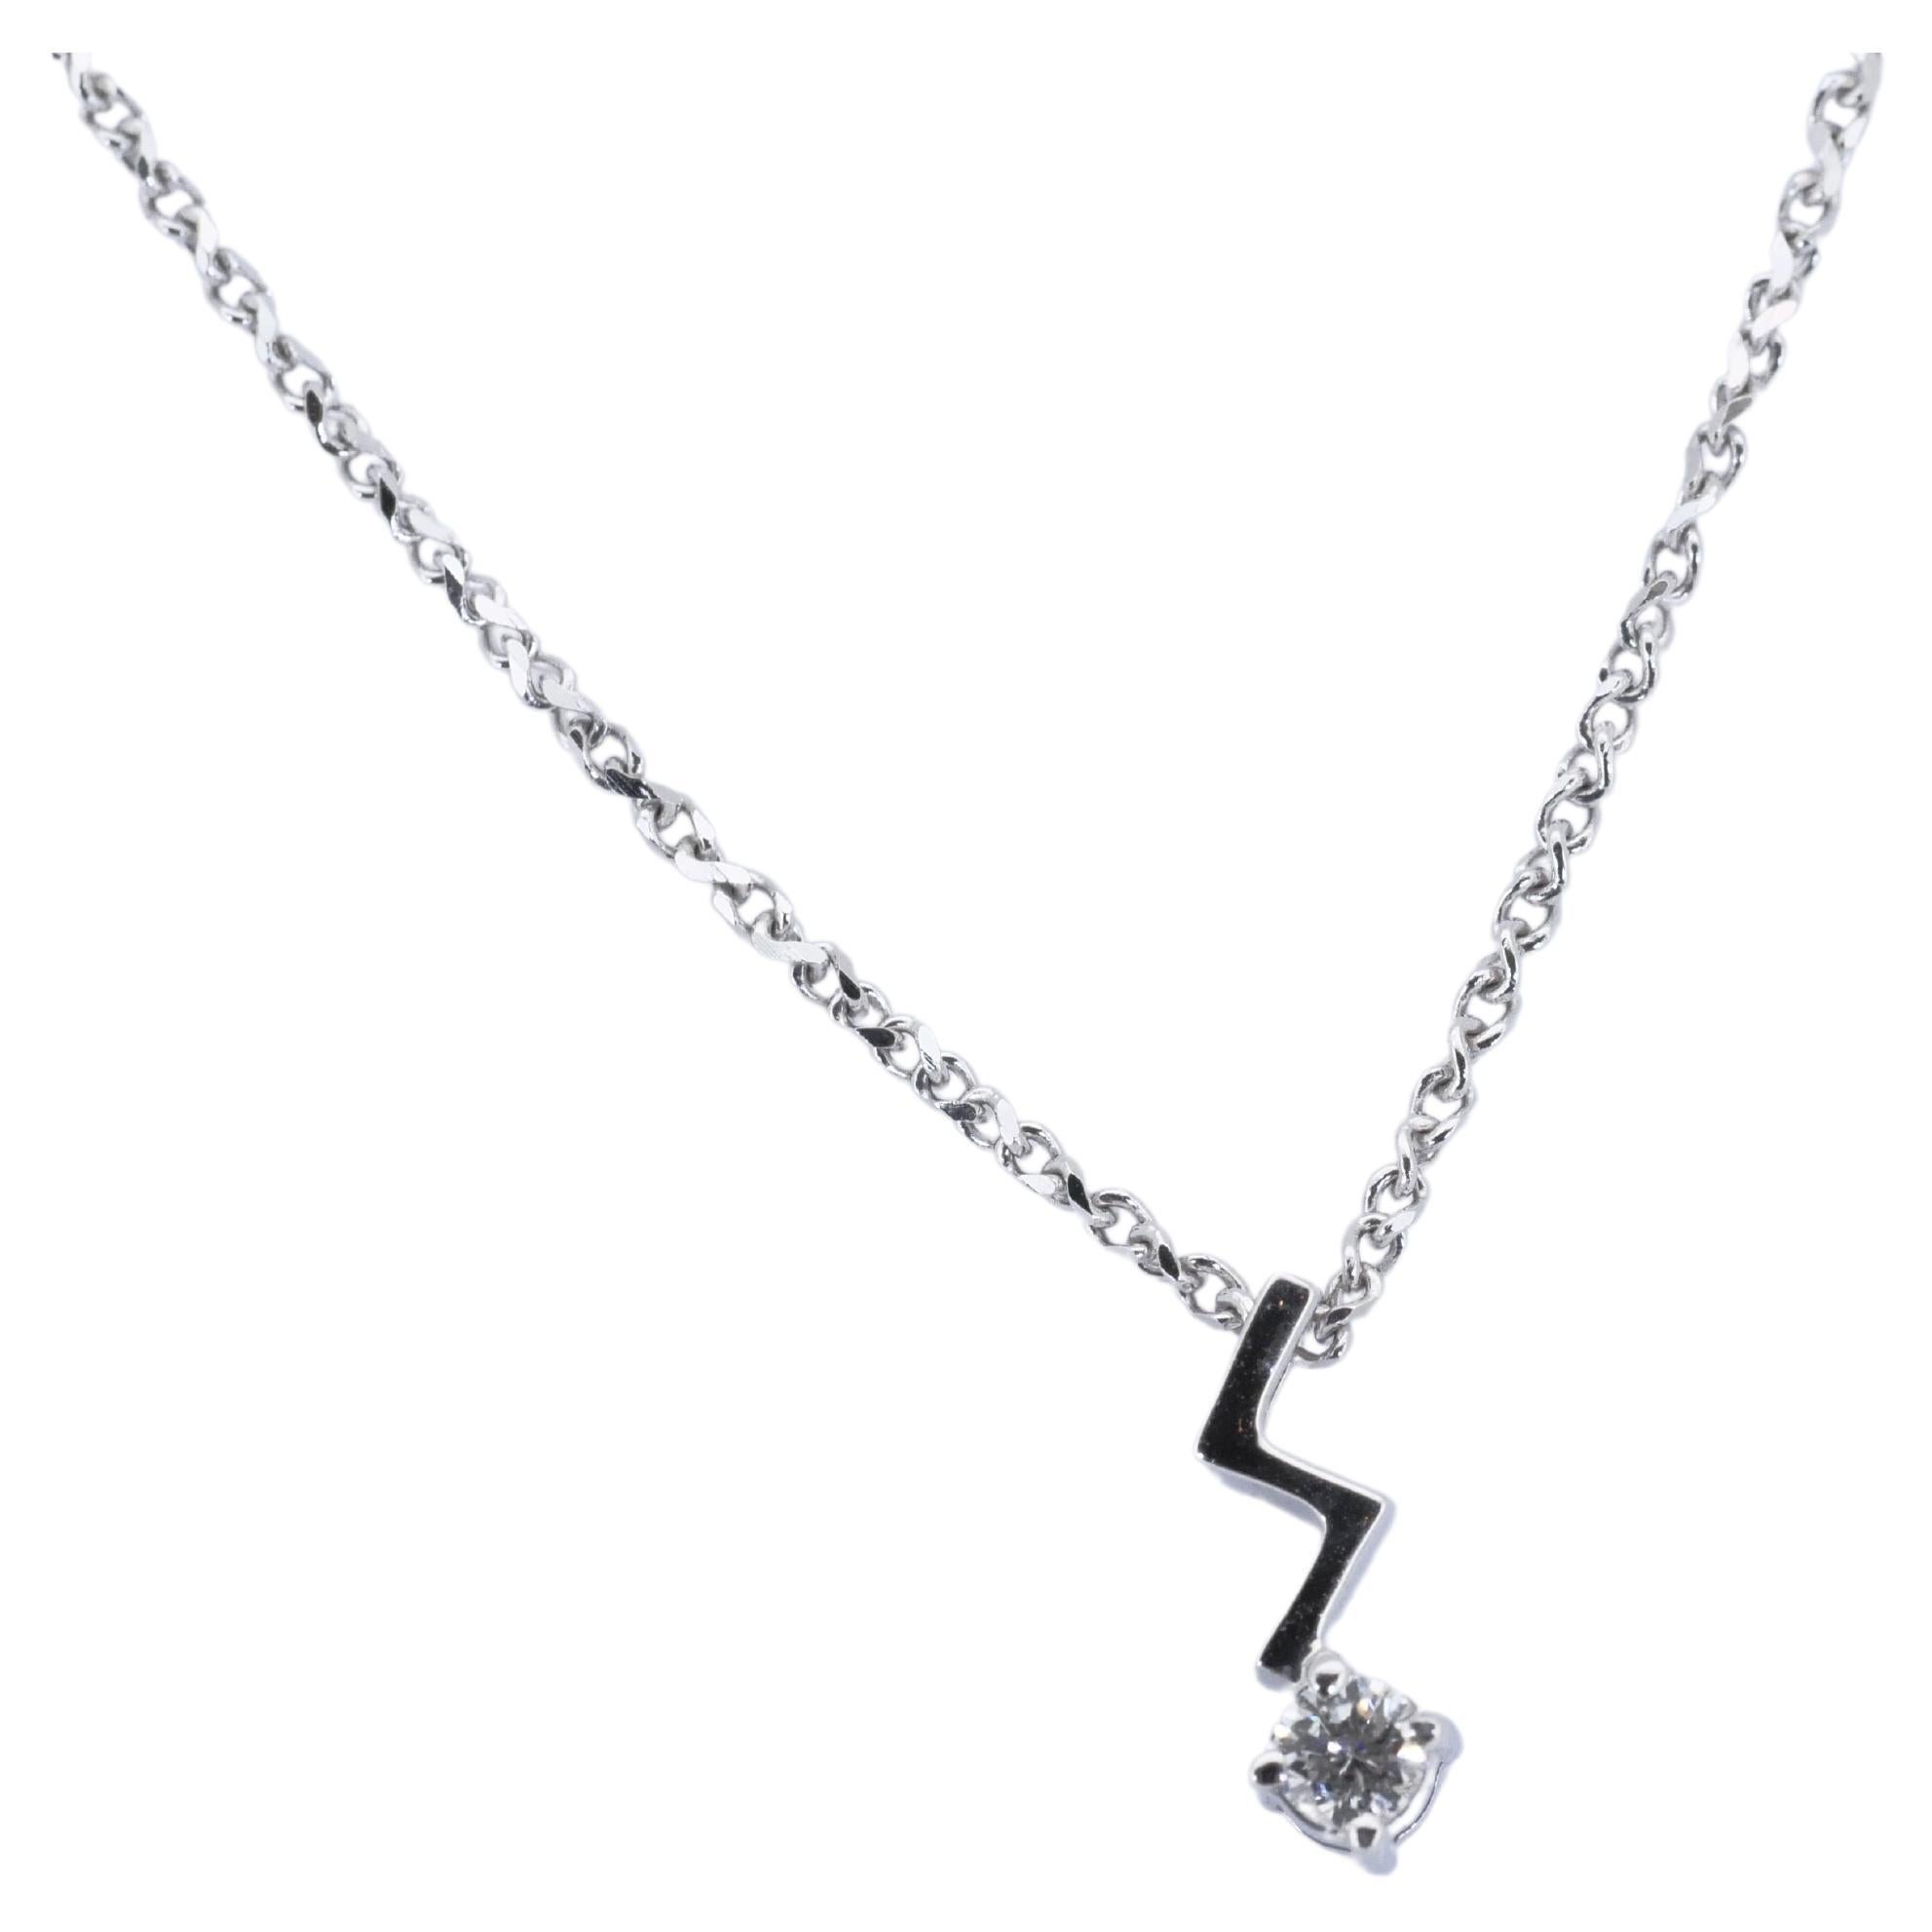 An elegant solitaire necklace with a dazzling 0.1 carat round brilliant diamond. The jewelry is made of 18k white gold with a high quality polish. It comes with a fancy jewelry box.

Product Details:

Metal: 18K White Gold

Main Stone: 
1 diamond